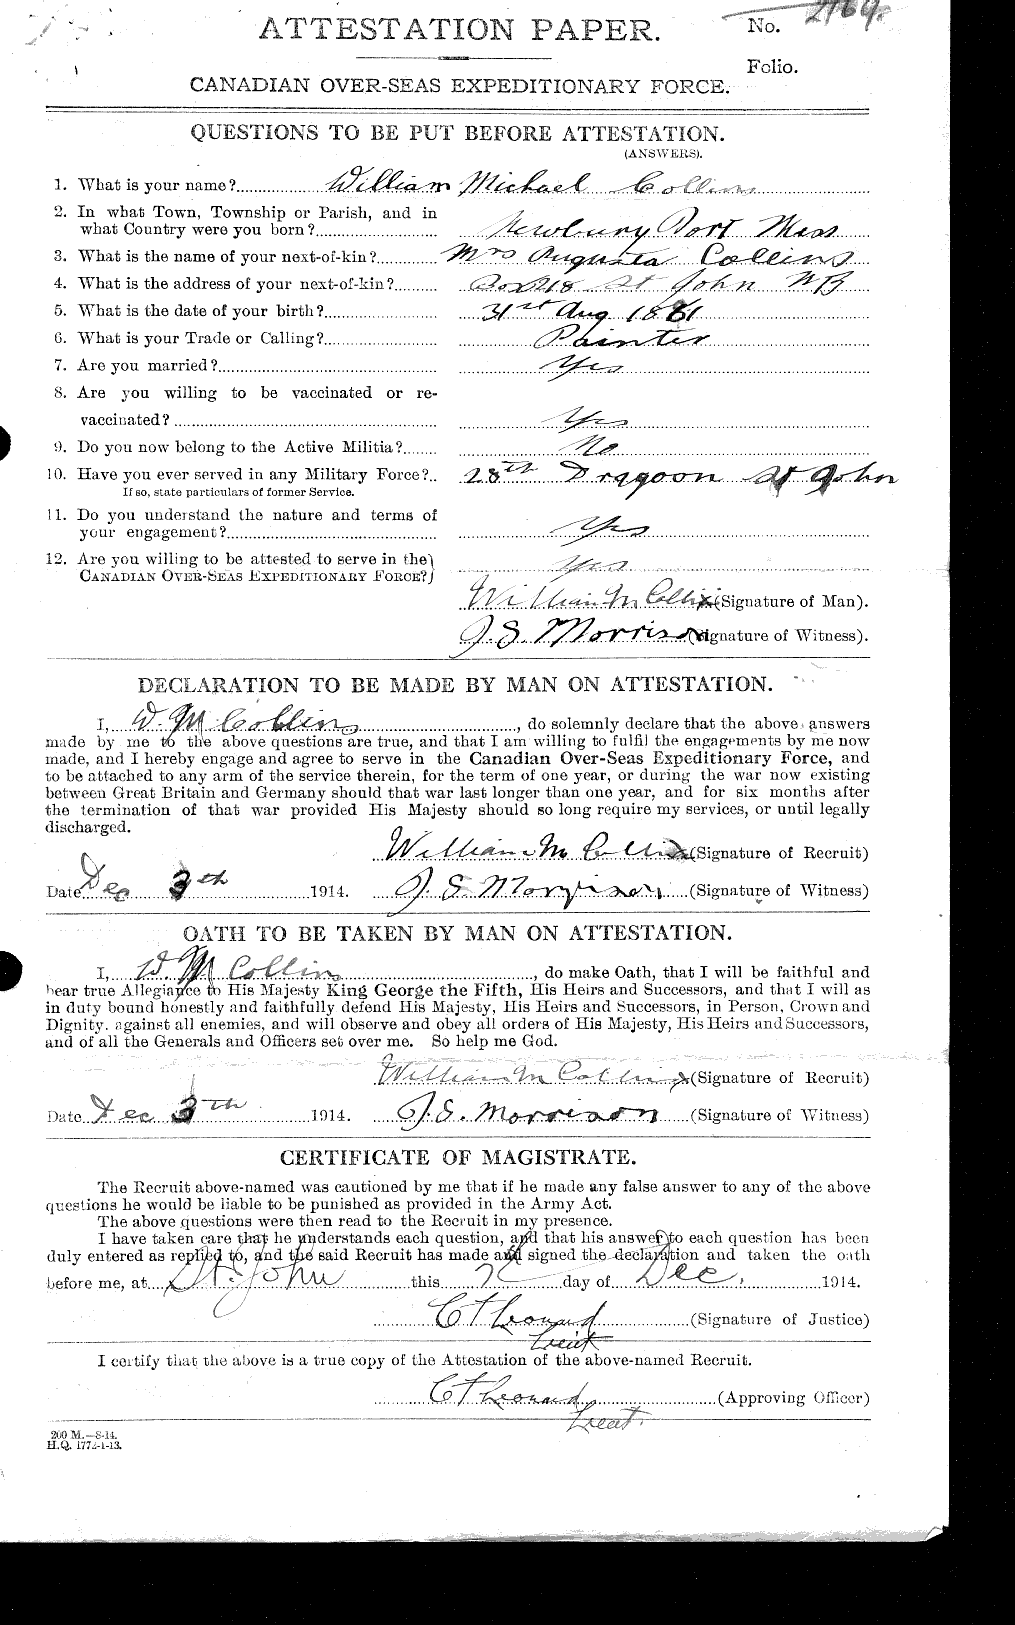 Personnel Records of the First World War - CEF 034624a